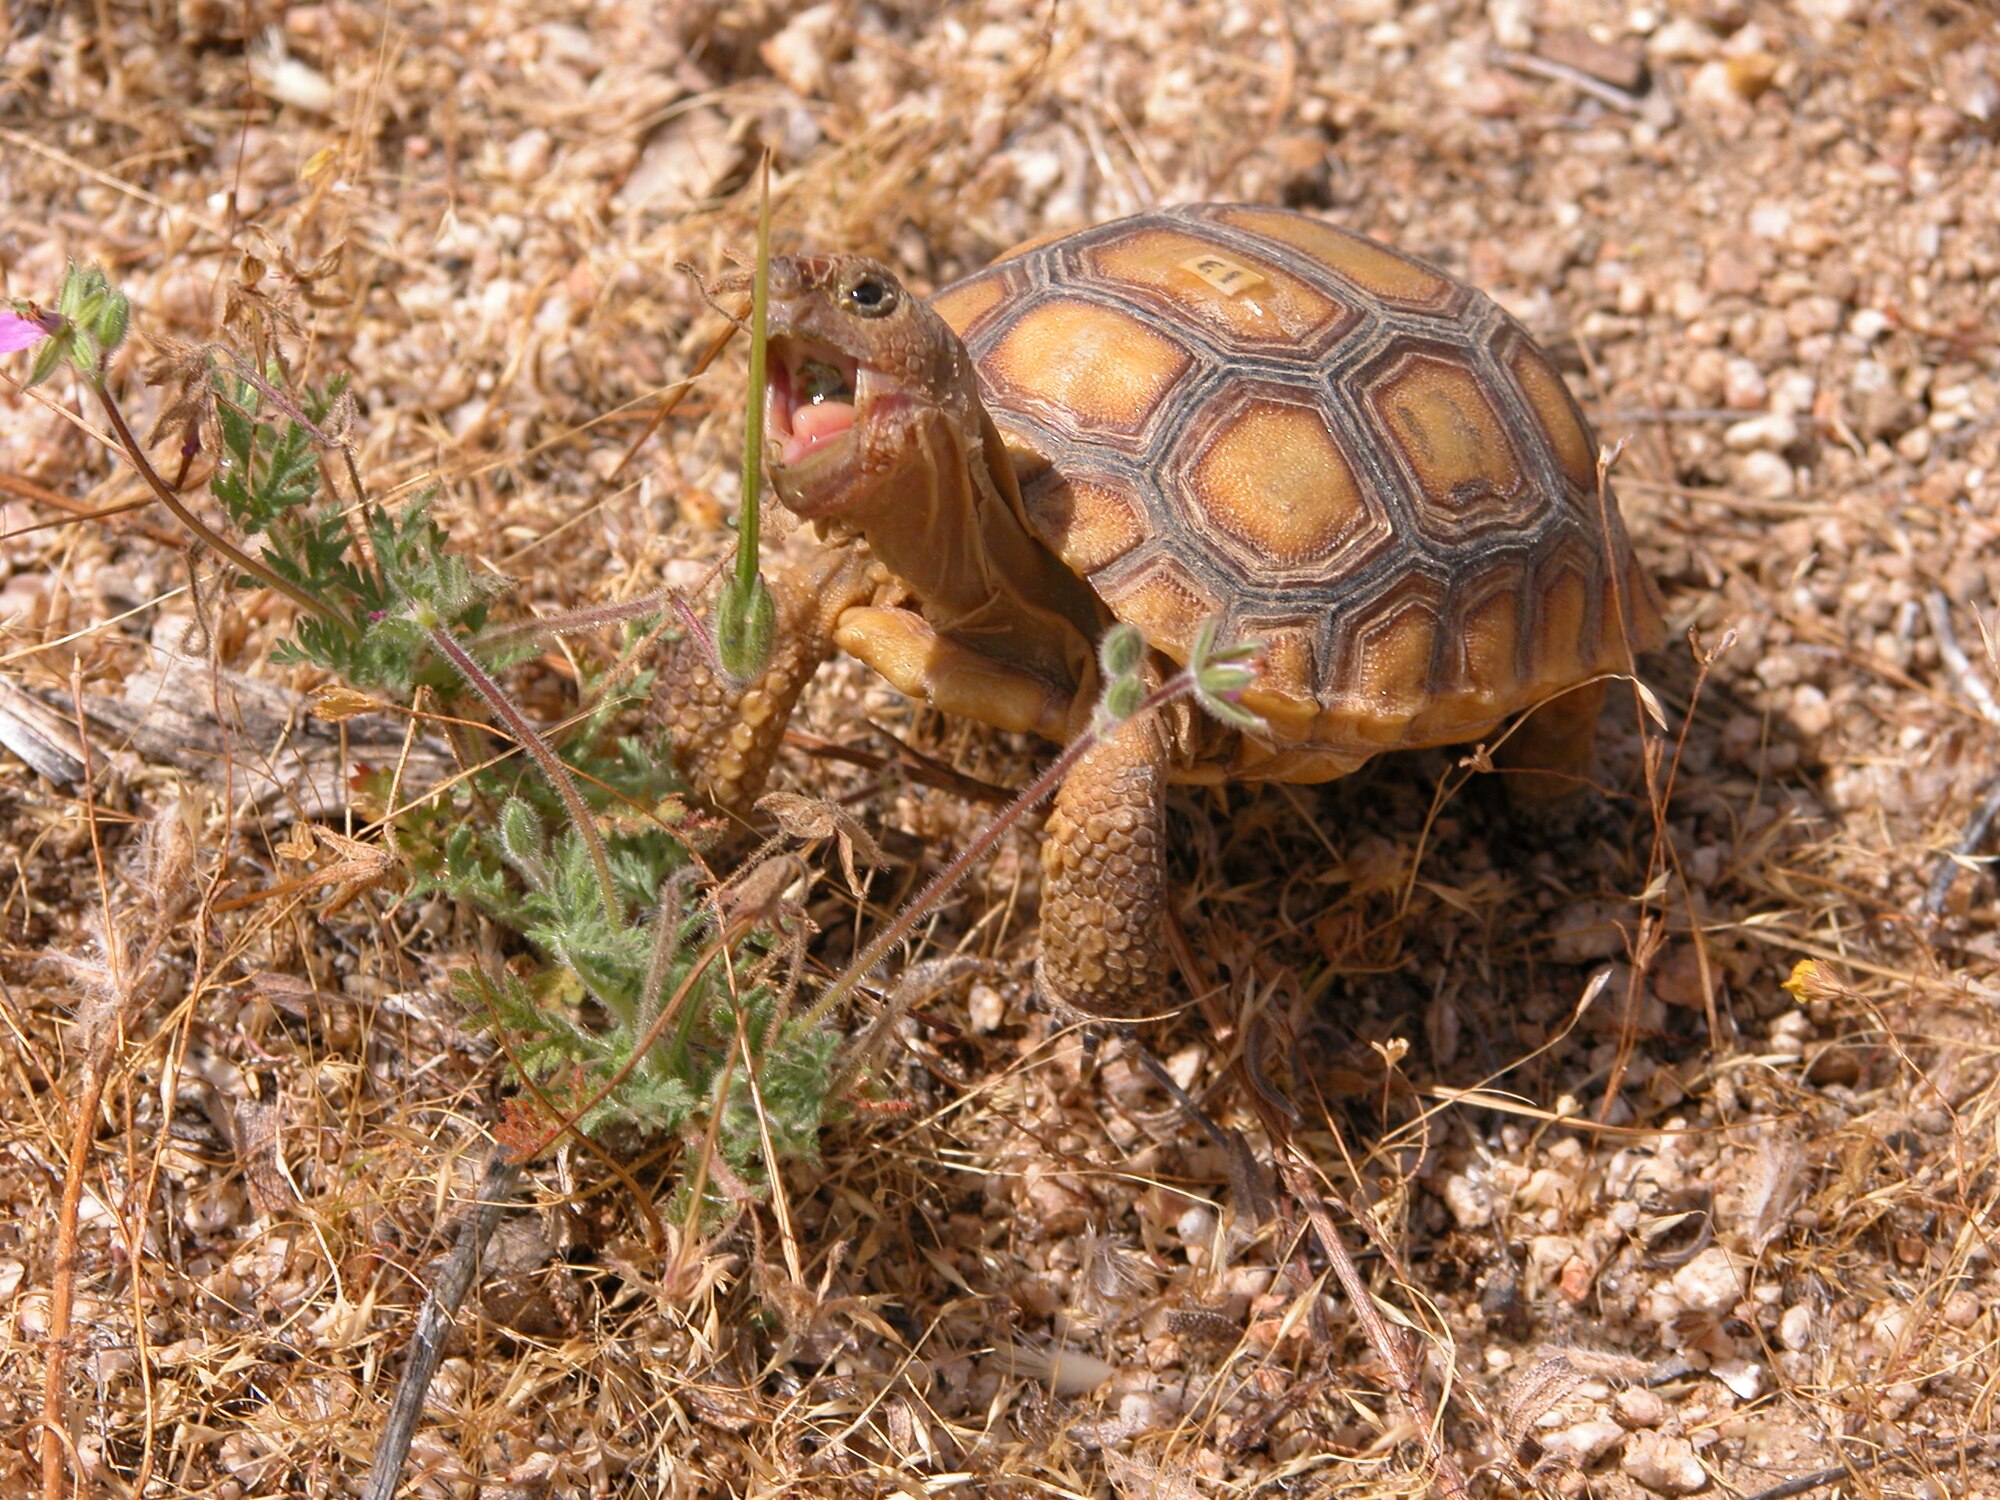 Even with conservation, the desert tortoise numbers continue to decline. Edwards Environmental Management is partnering with San Diego Zoo Global and the United States Geological Survey in an effort to increase the desert tortoise population through head-starting and translocation research. (Courtesy photo)